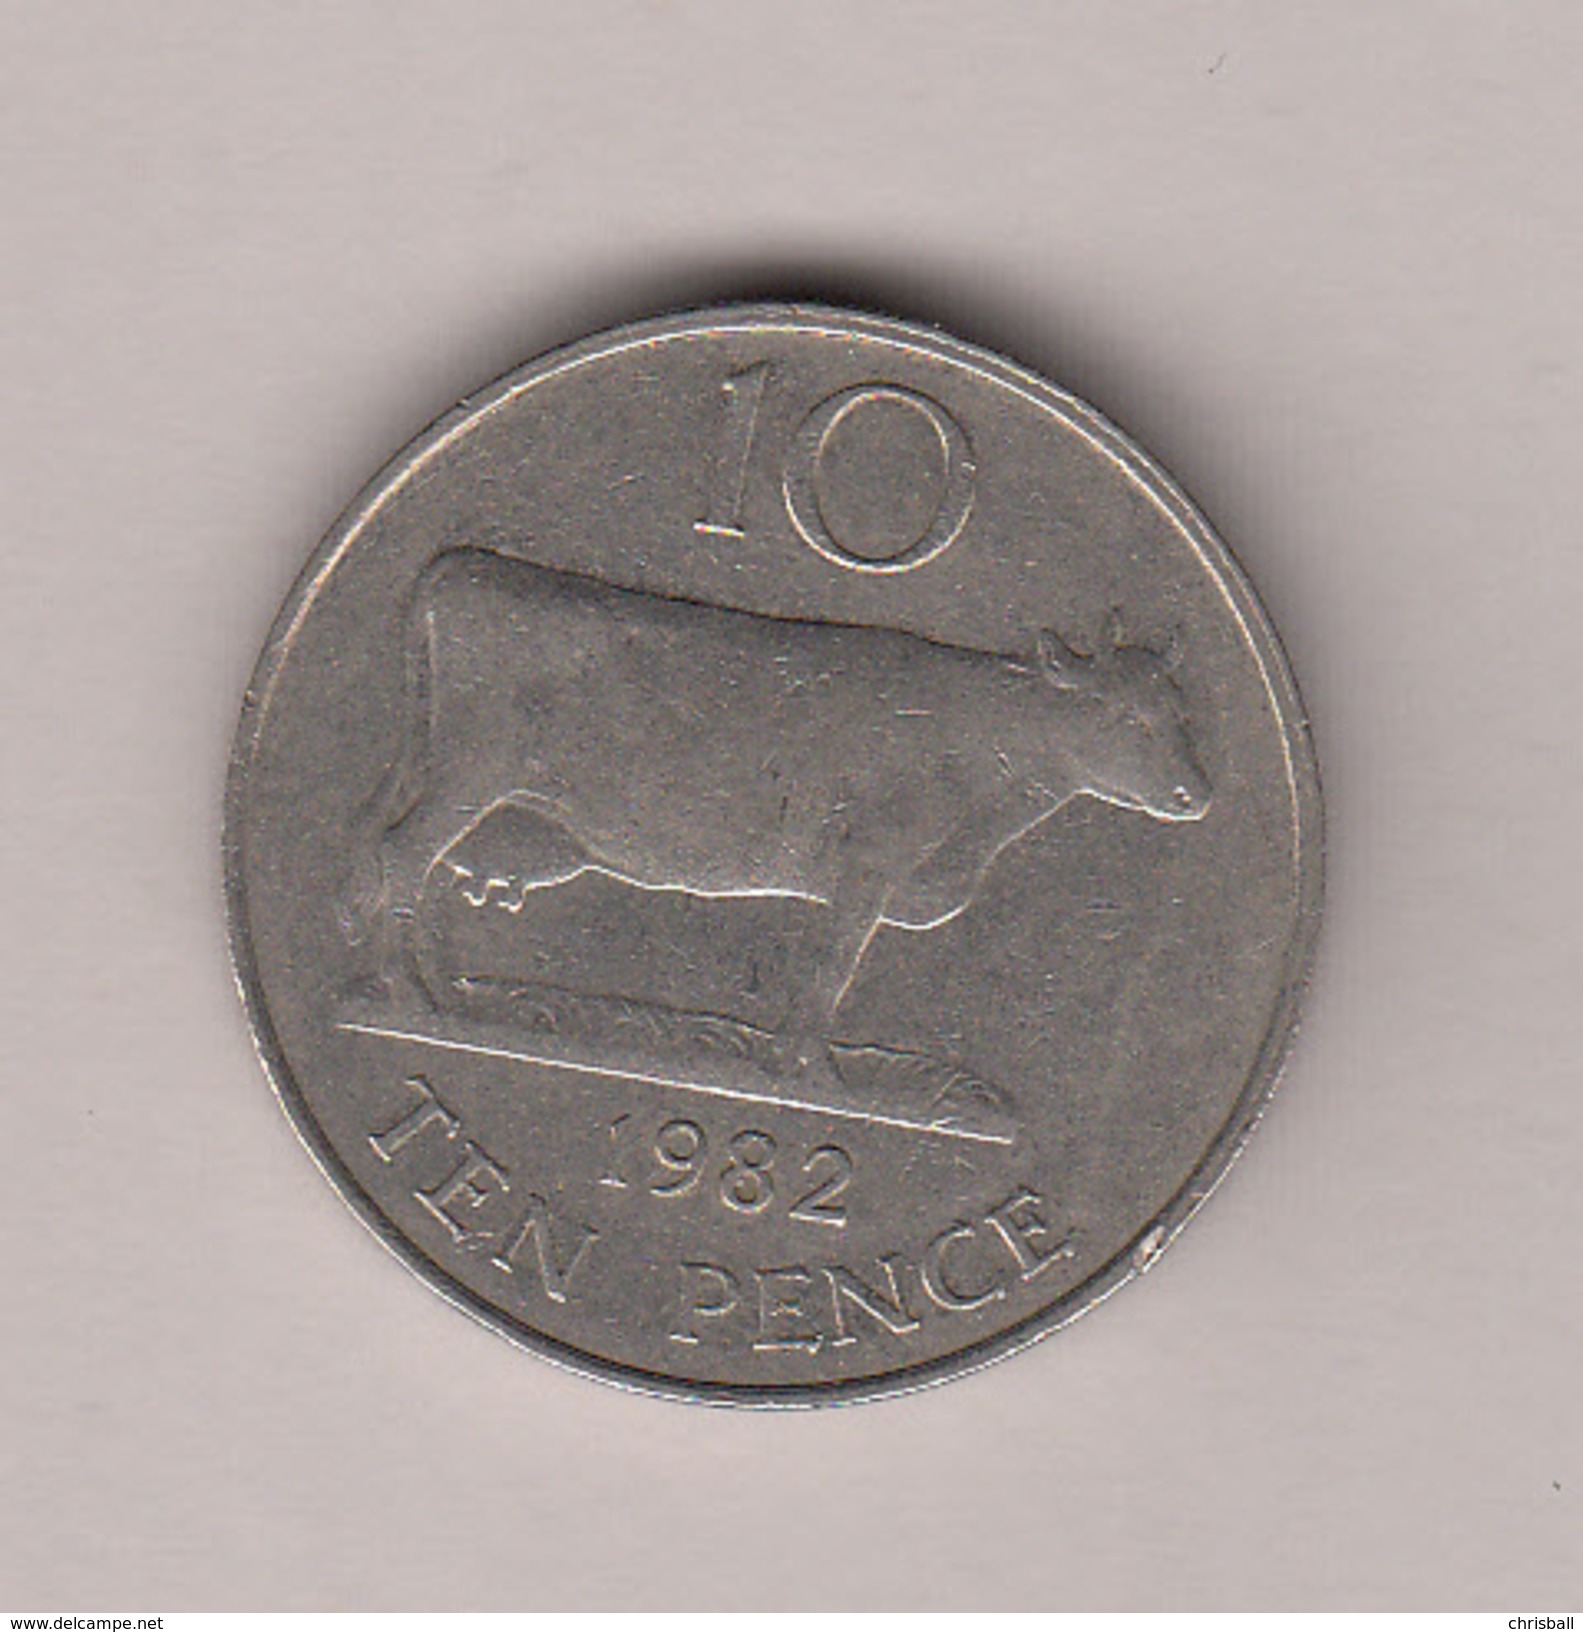 Guernsey Coin 10p 1982 (Large Format) - Guernsey